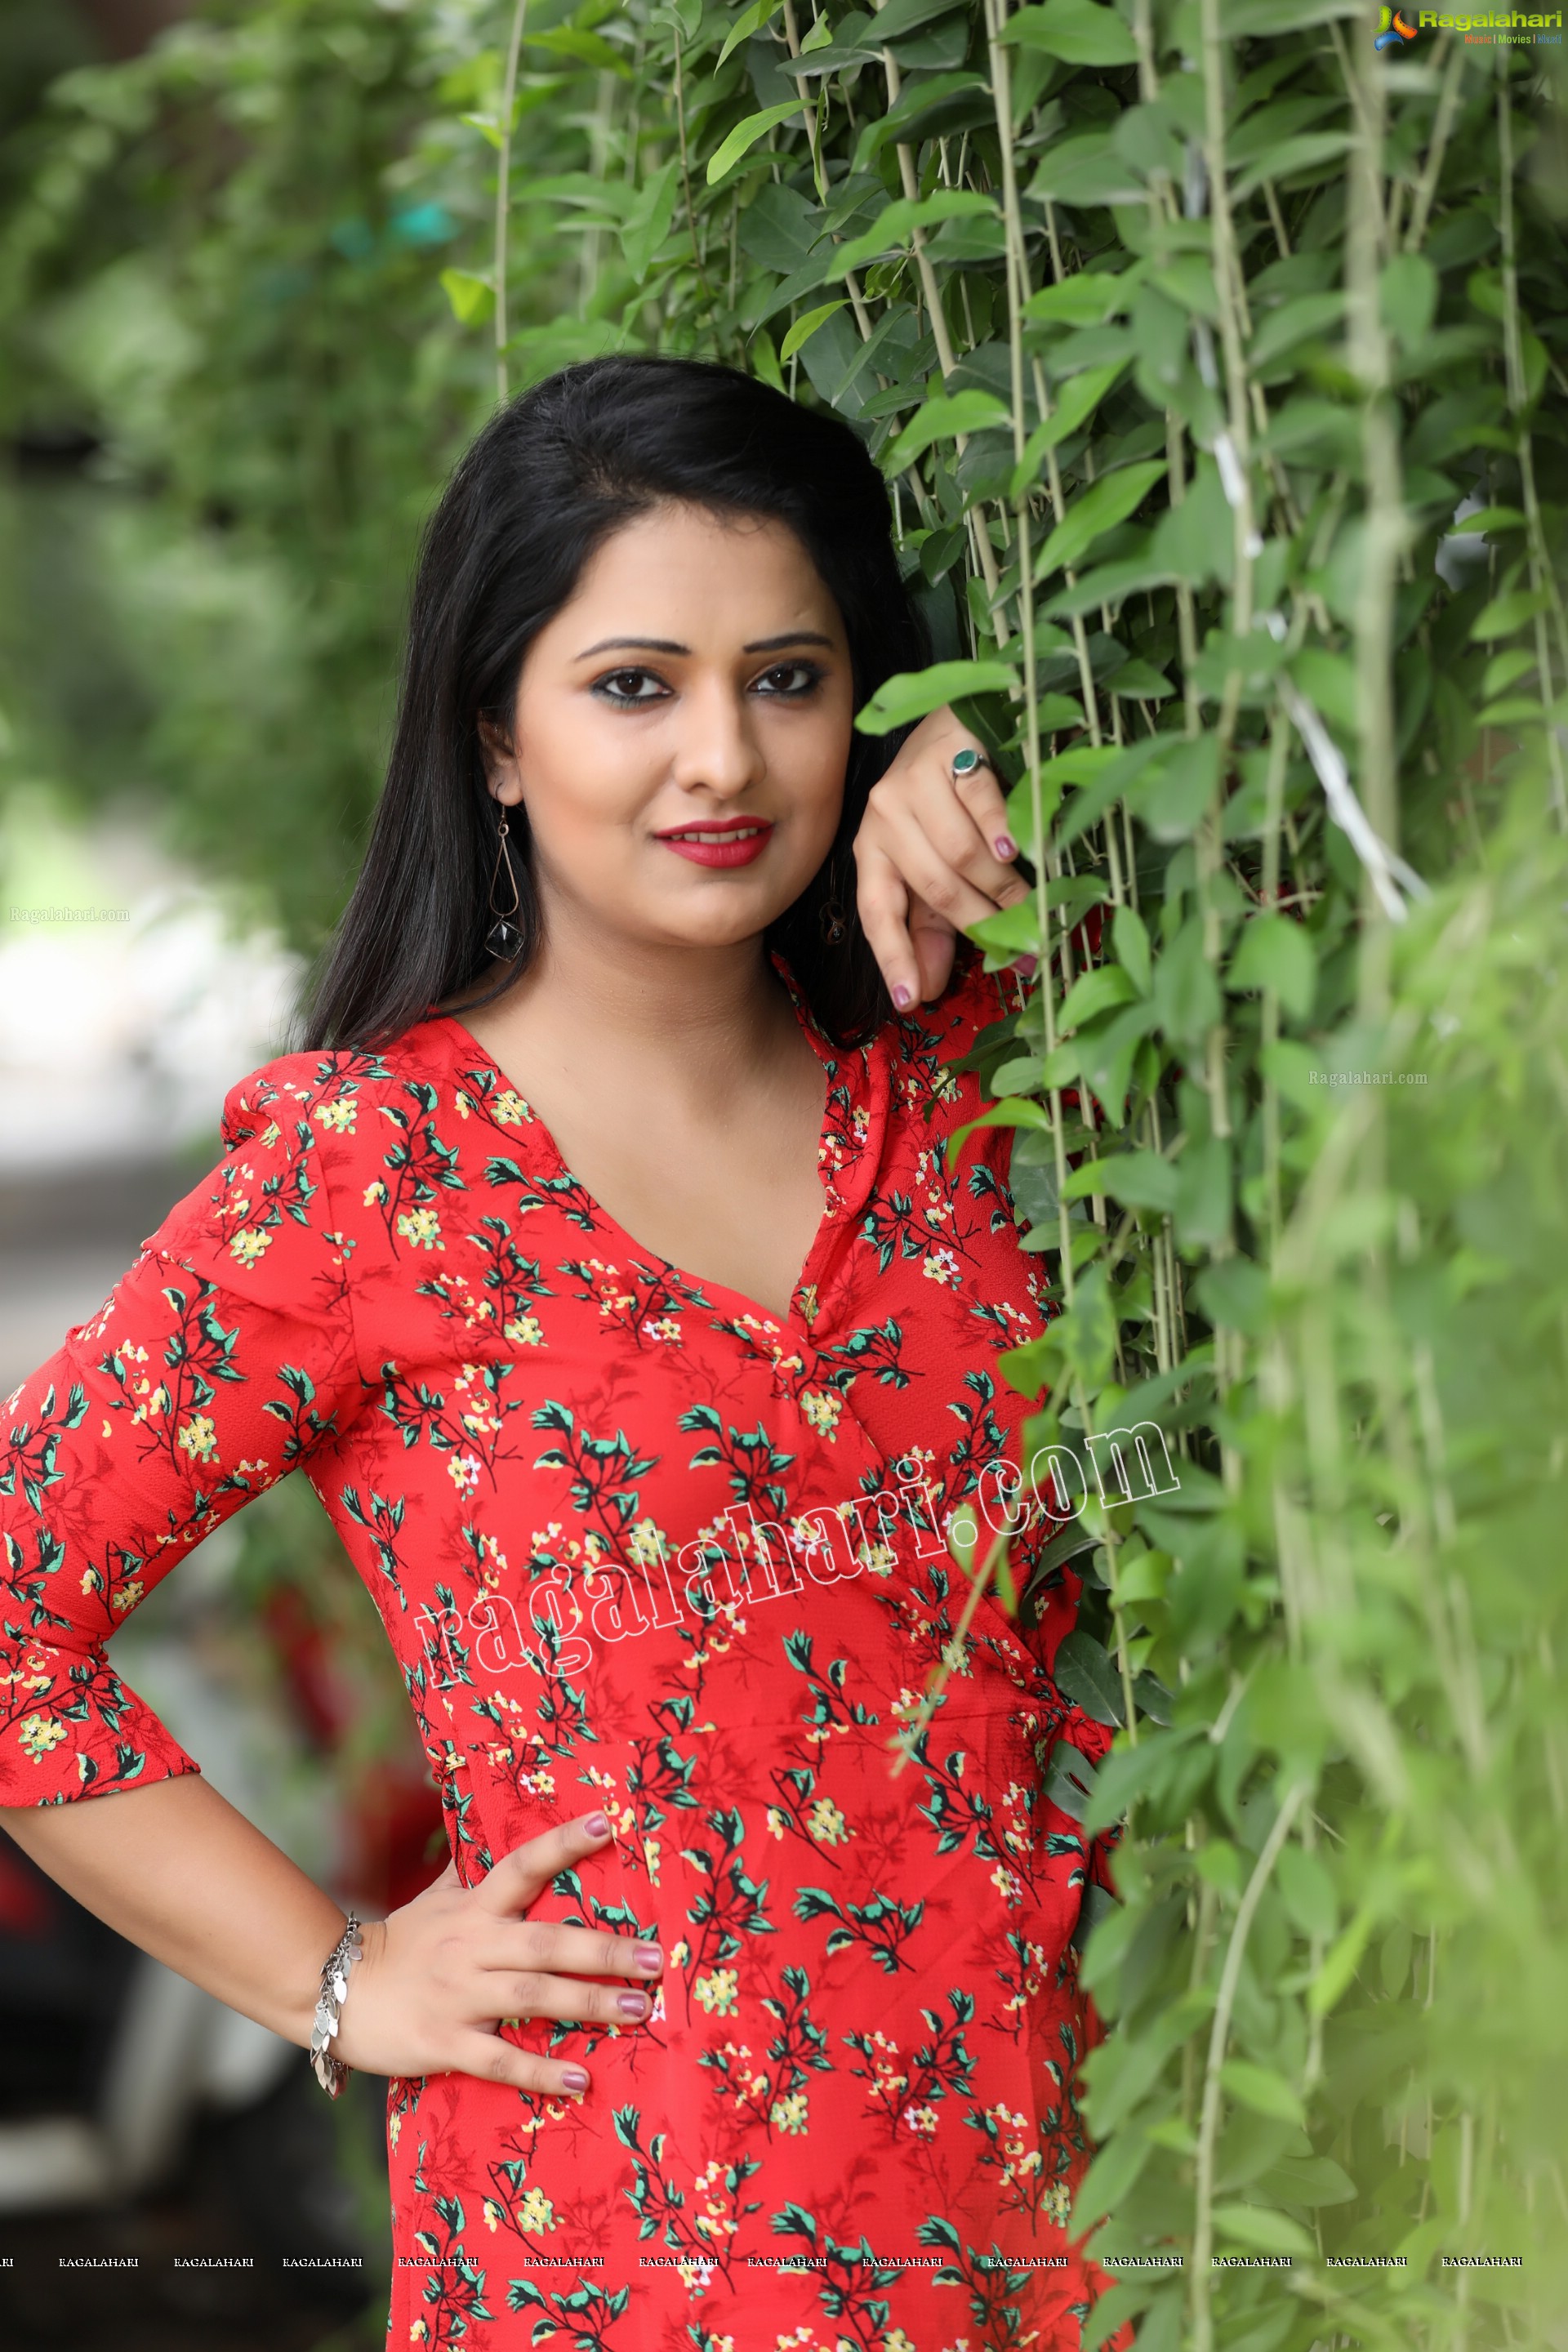 Nikita Bisht in Red Floral Tie Front Tunic Mini Dress Exclusive Photo Shoot